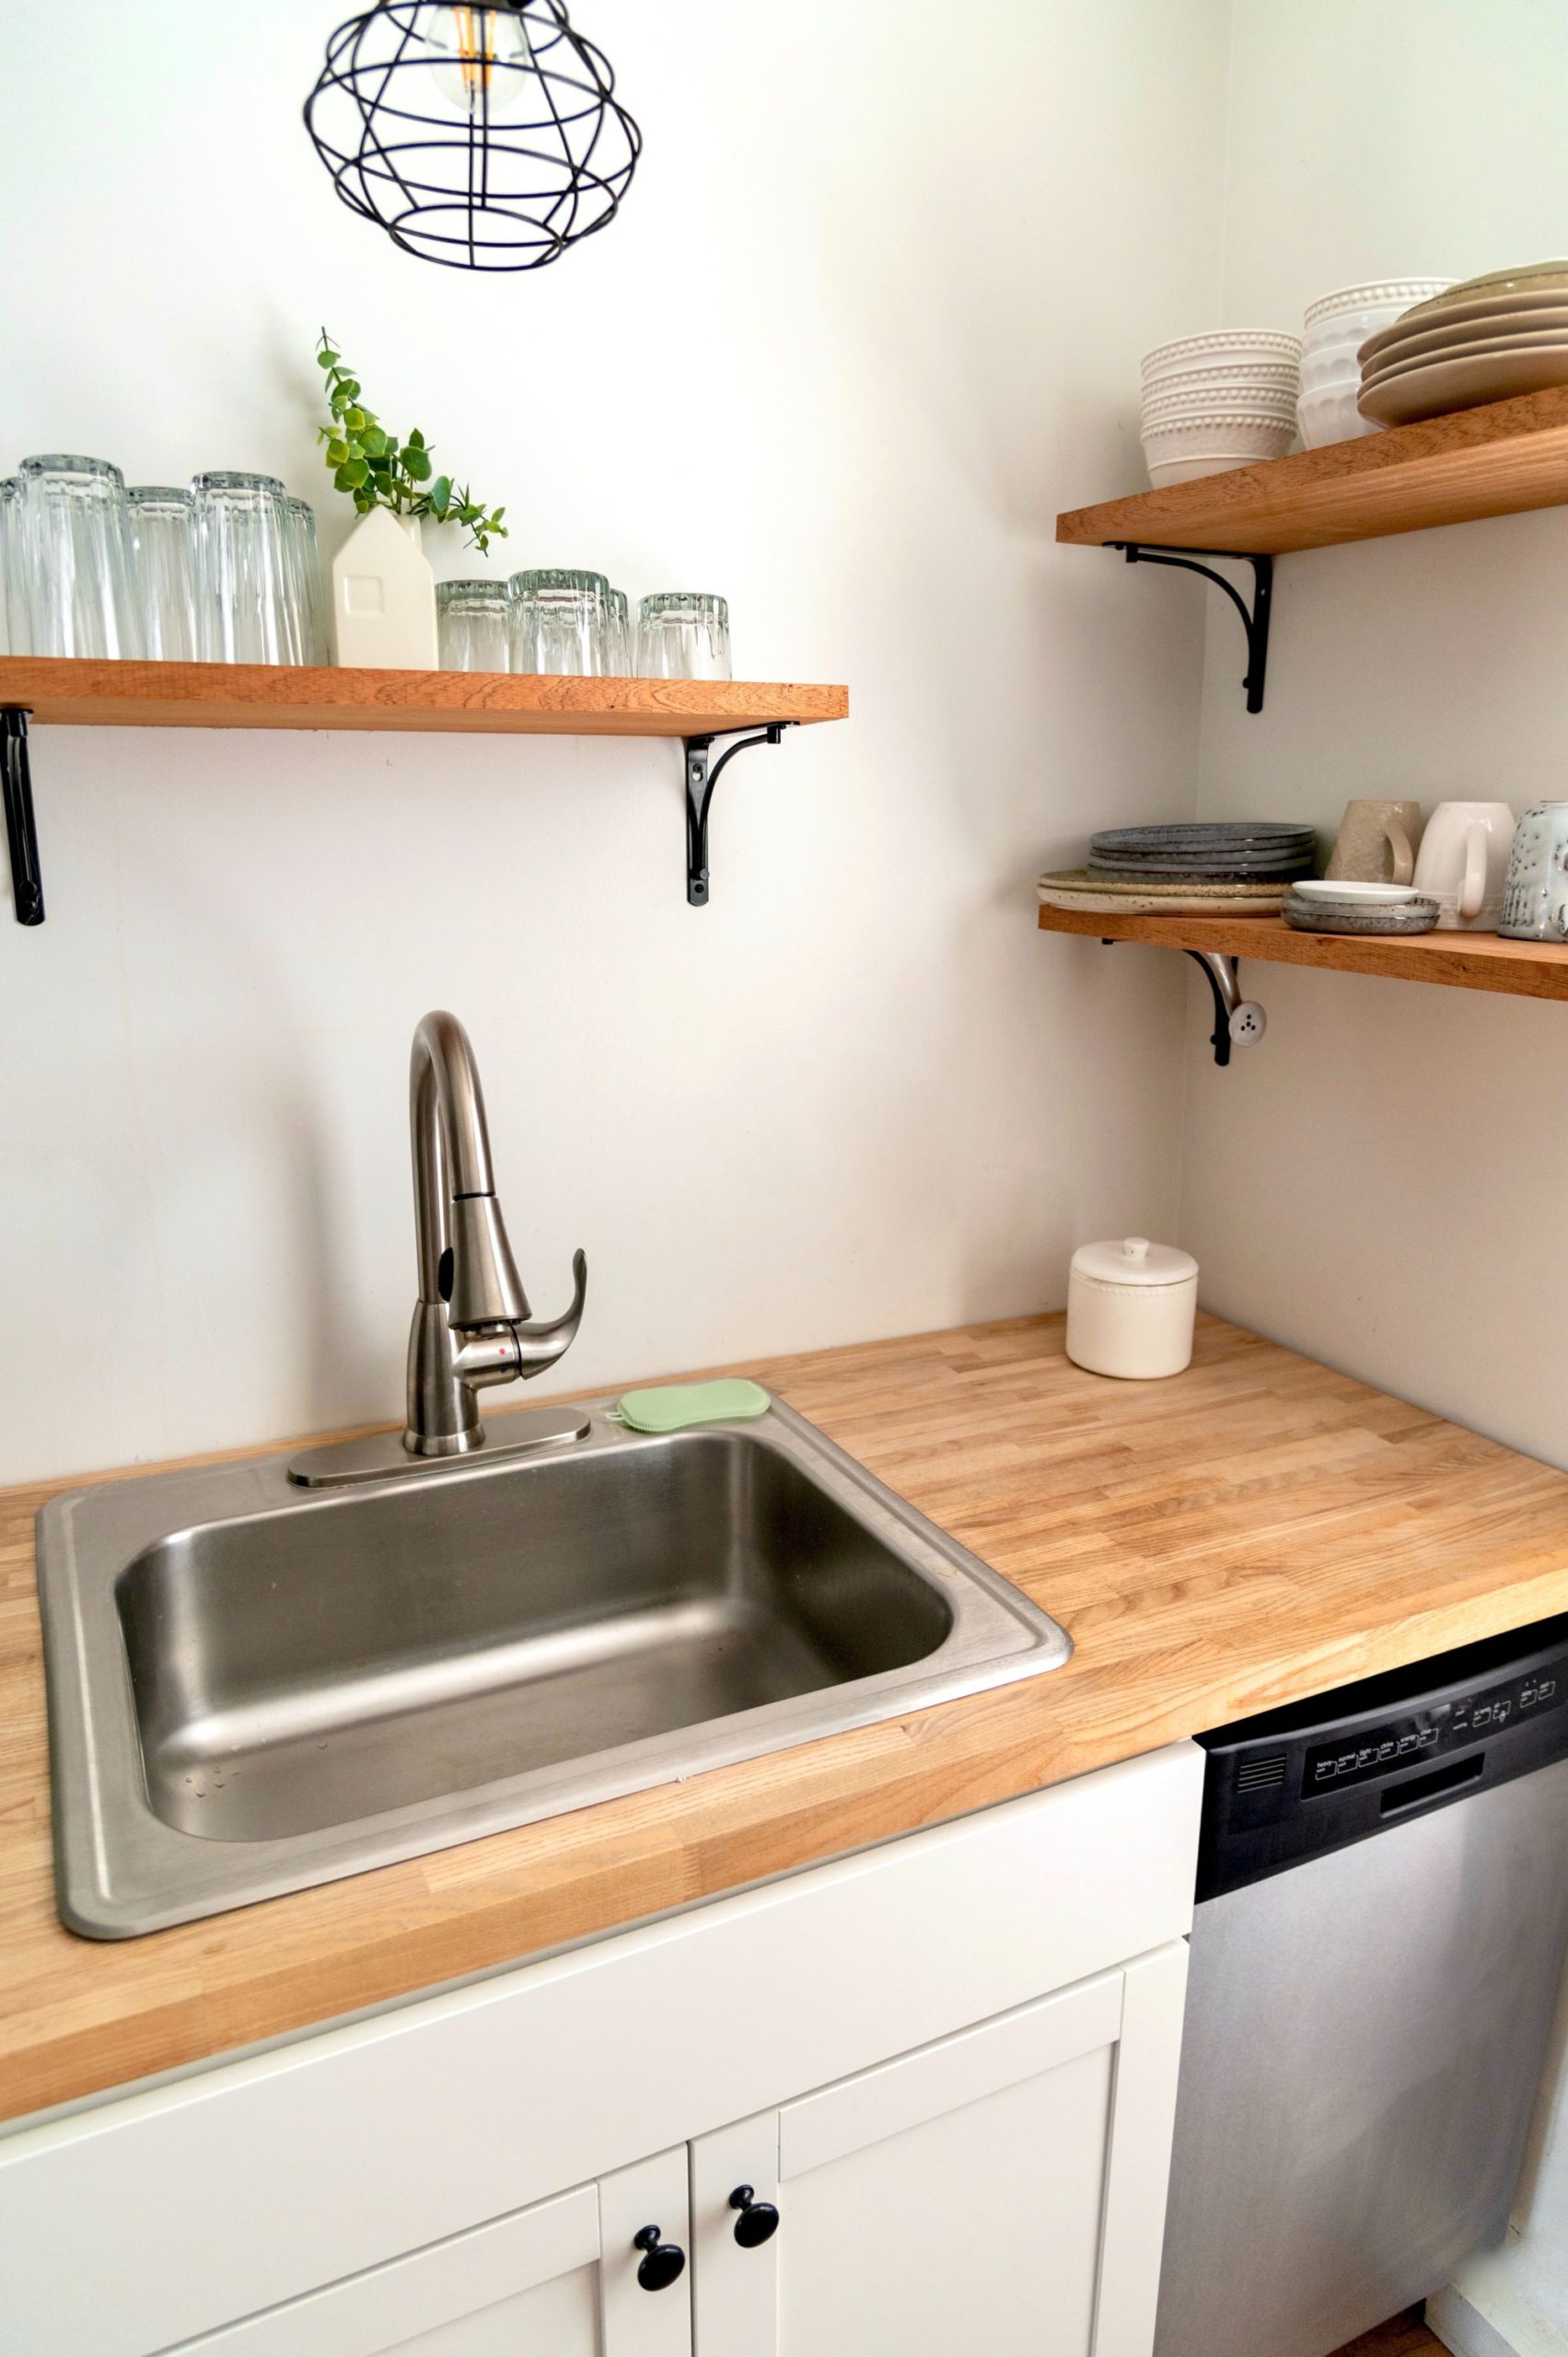 How to Pick the Best Kitchen Sink and Faucet